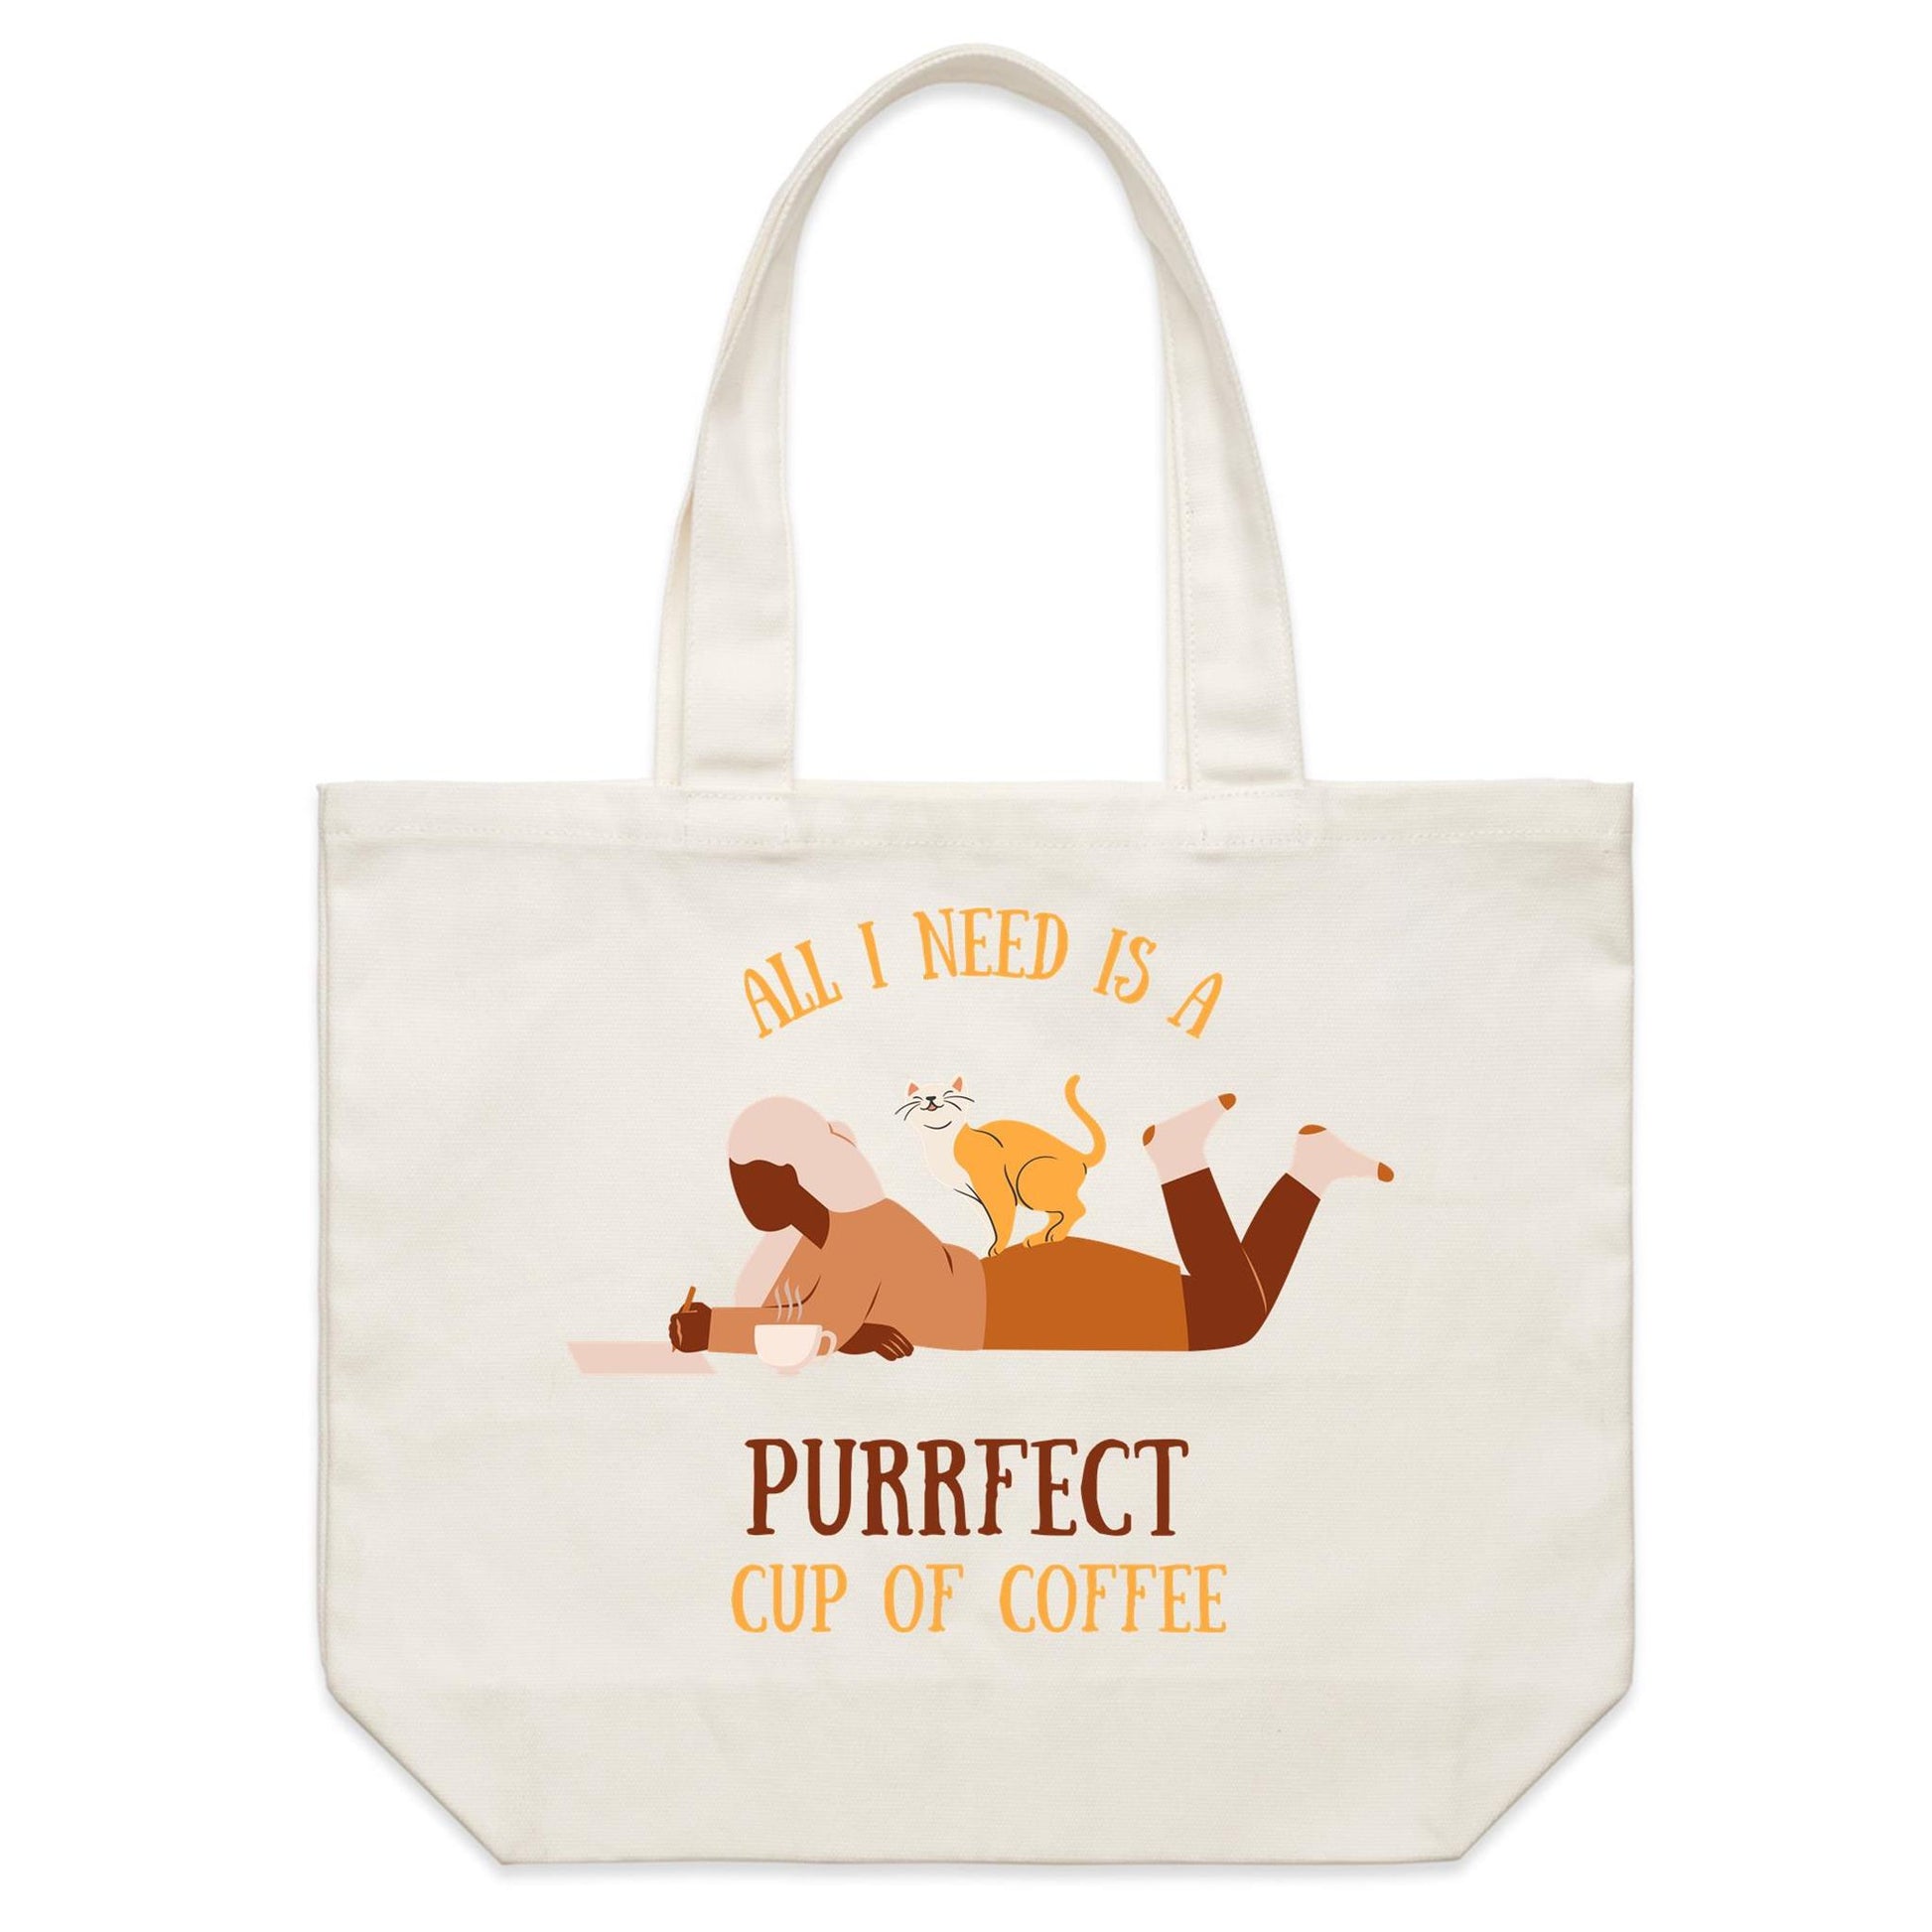 All I Need Is A Purrfect Cup Of Coffee - Shoulder Canvas Tote Bag Default Title Shoulder Tote Bag